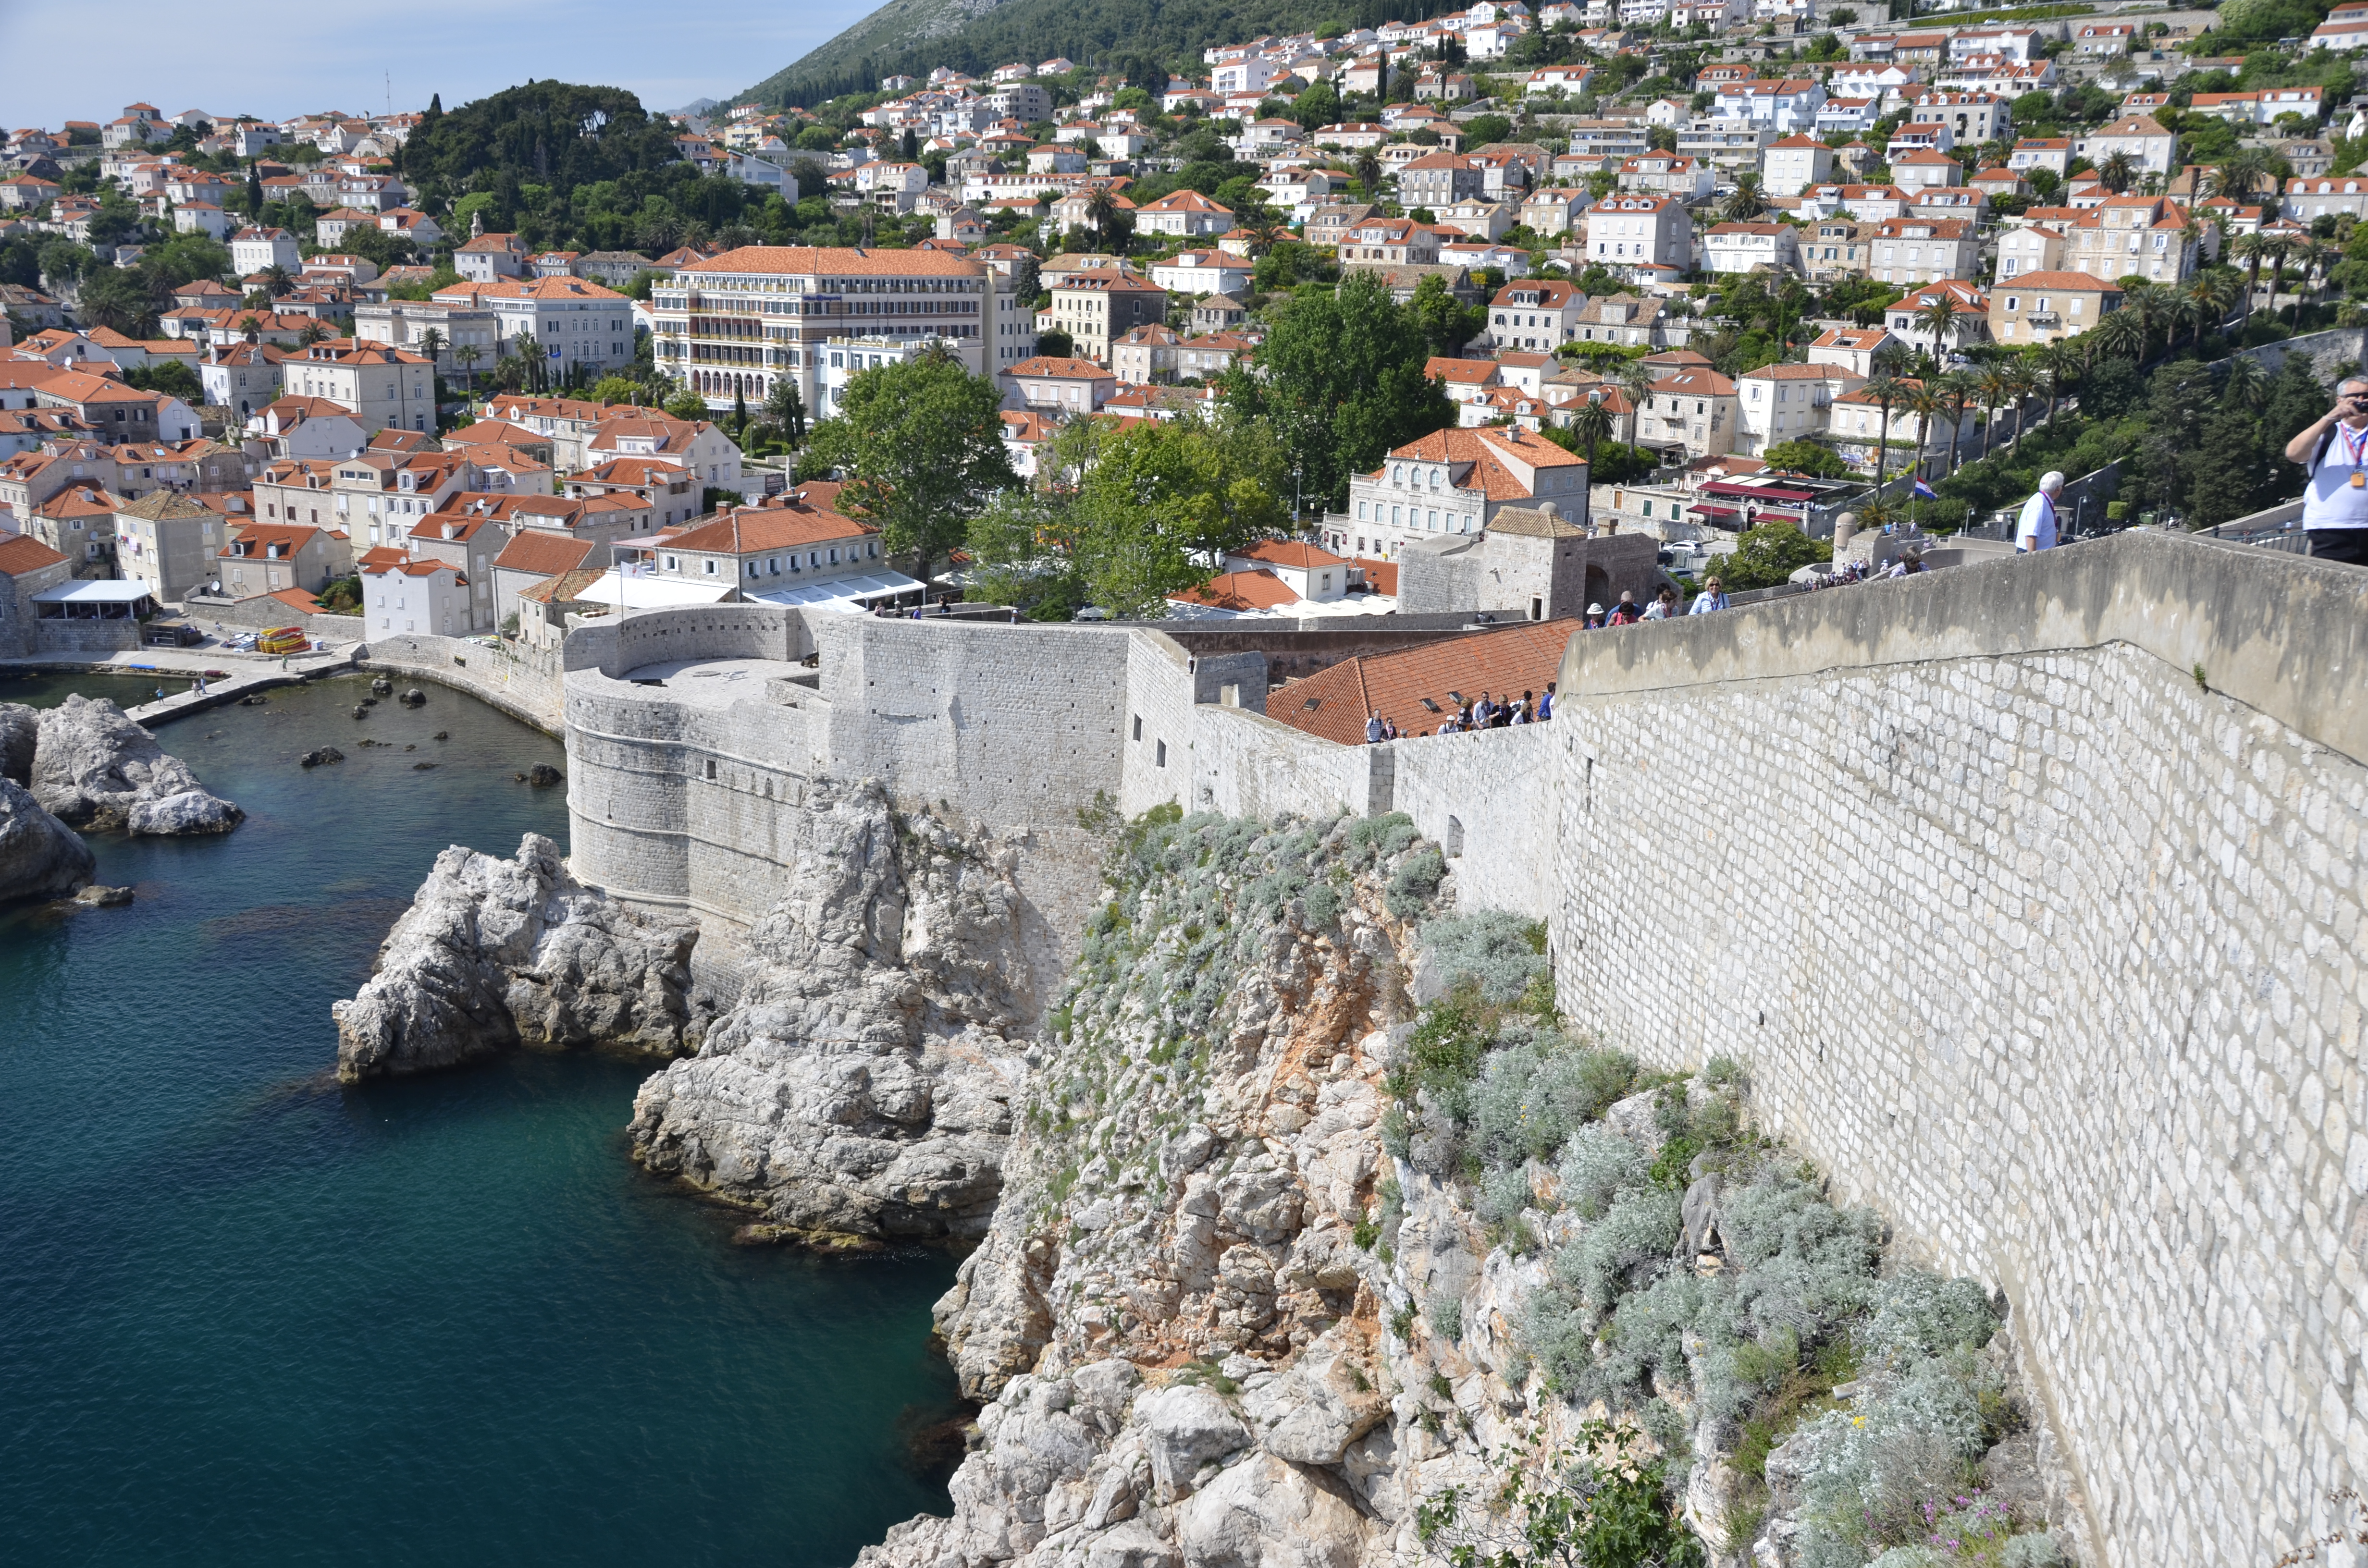 The walls of Dubrovnik surround the city. They are 1940 meters long (6365 feet).